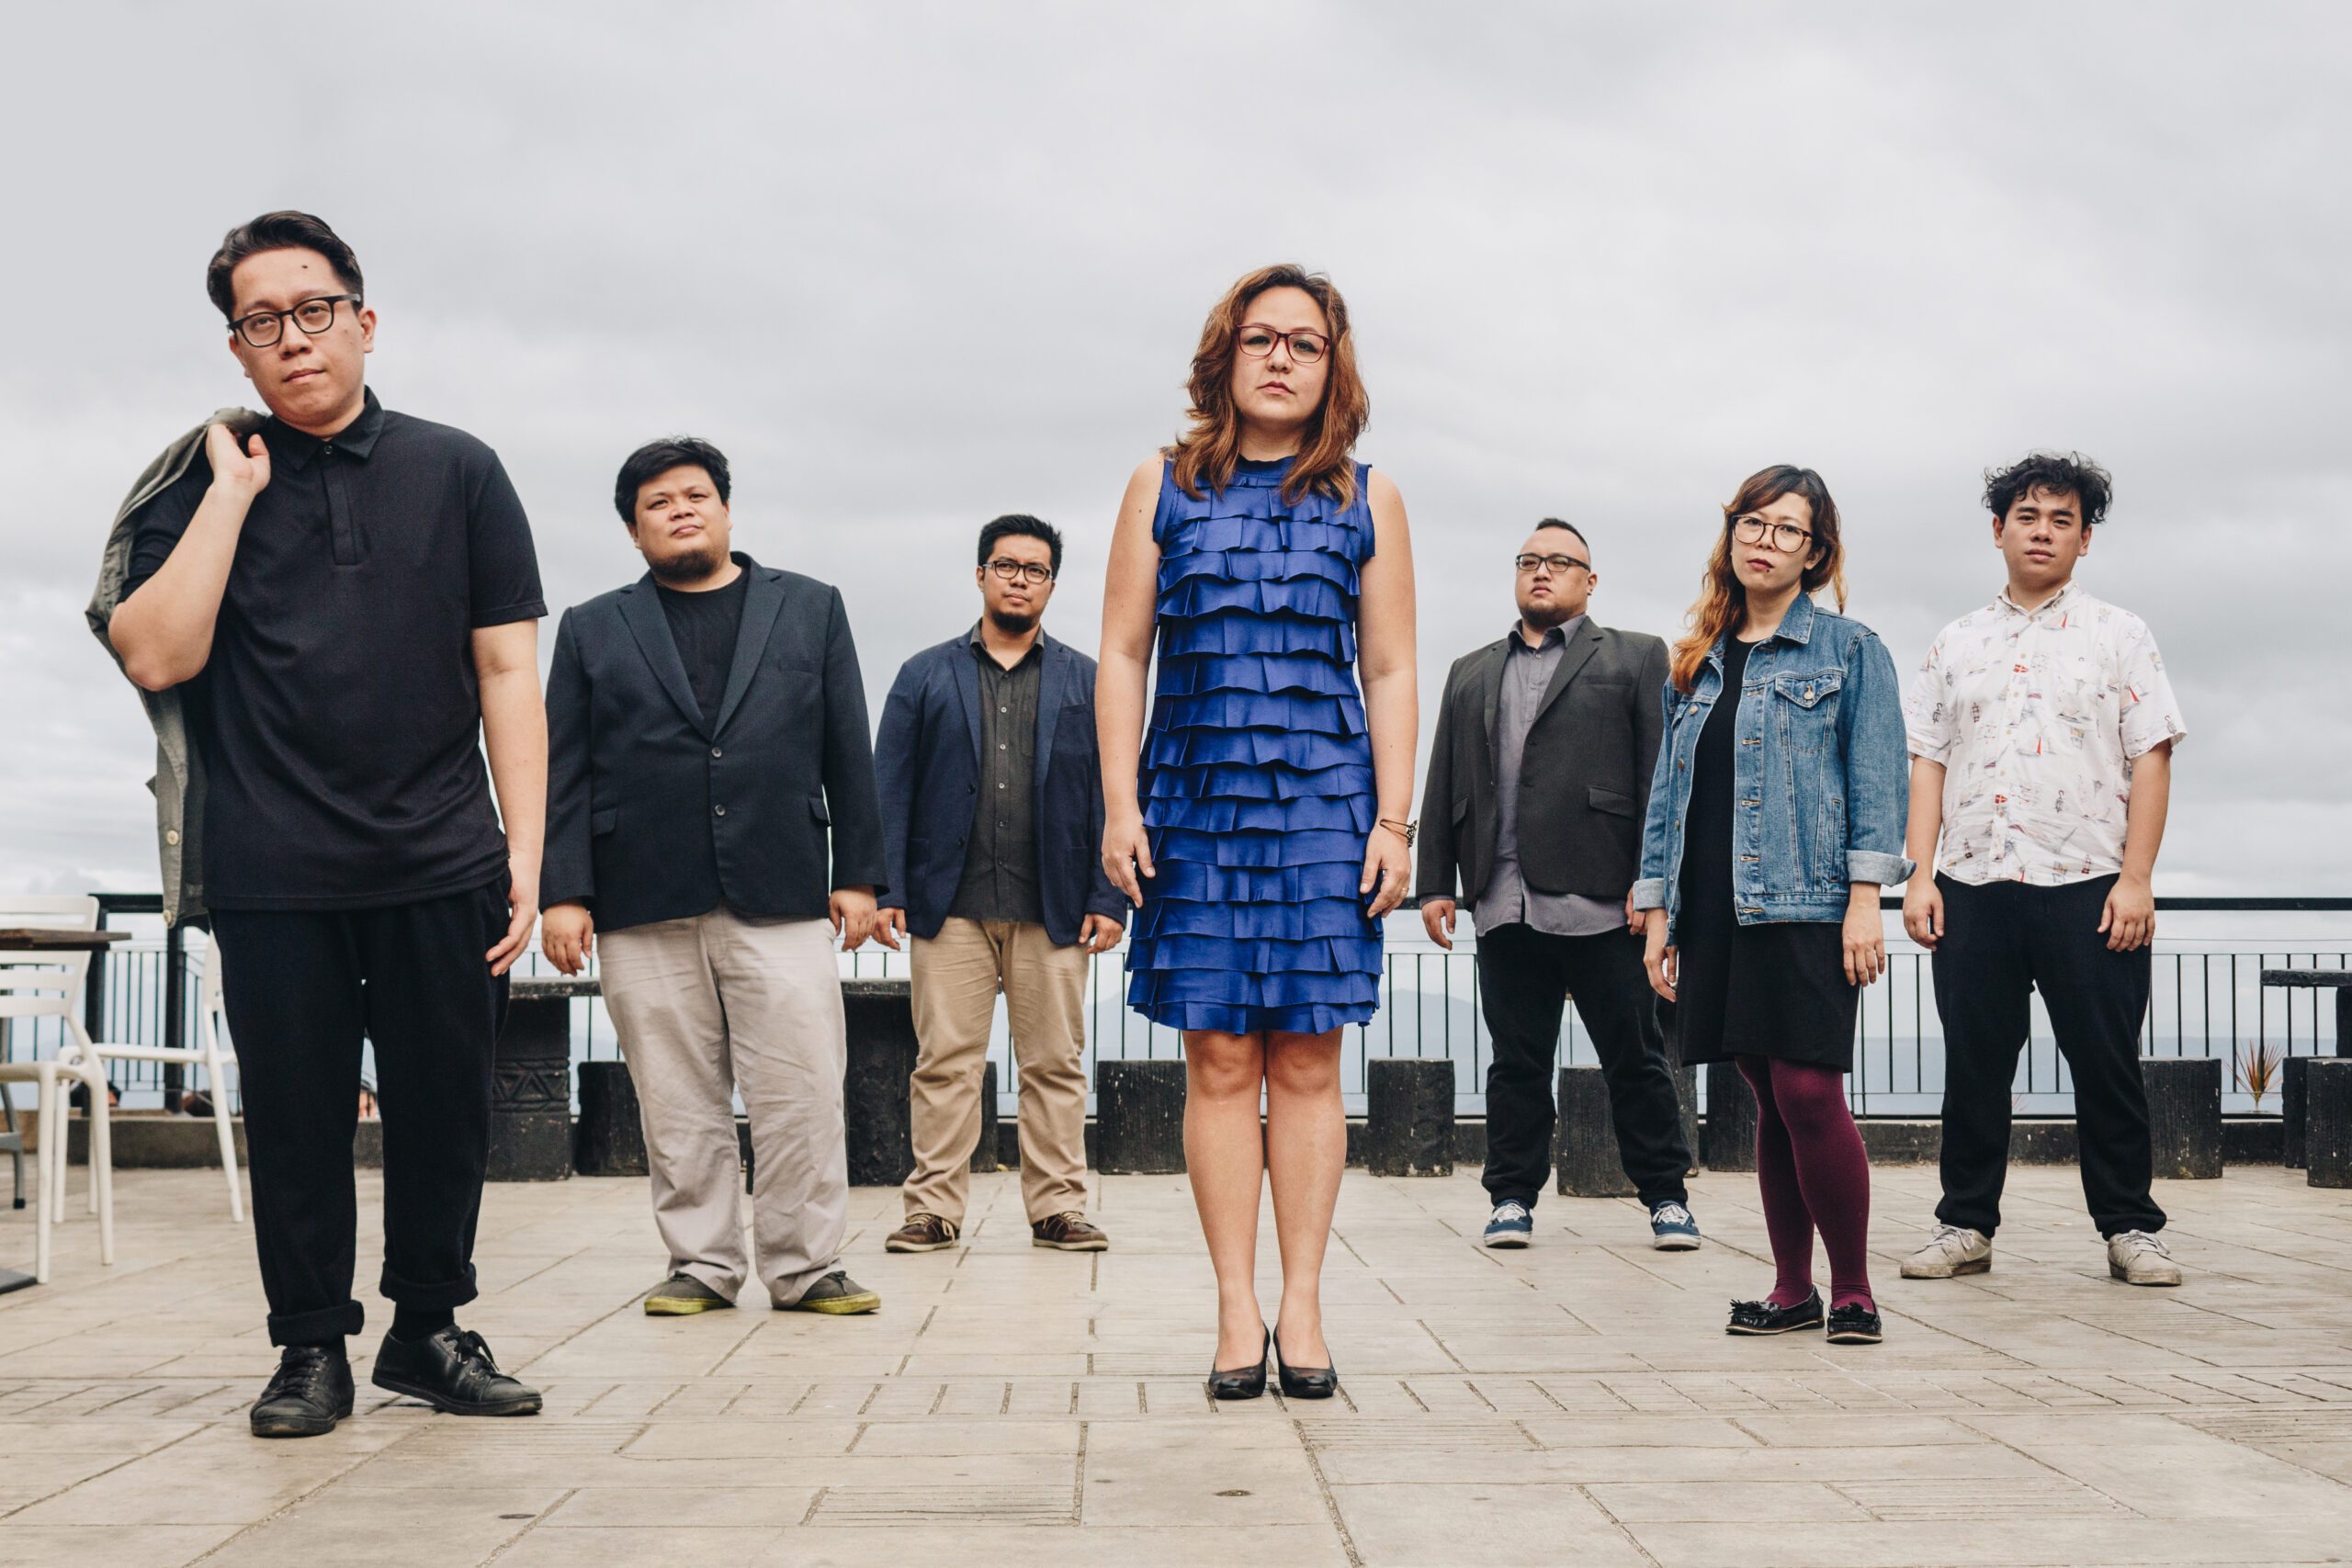 Our ‘Favorite’ Ang Bandang Shirley album is coming very soon